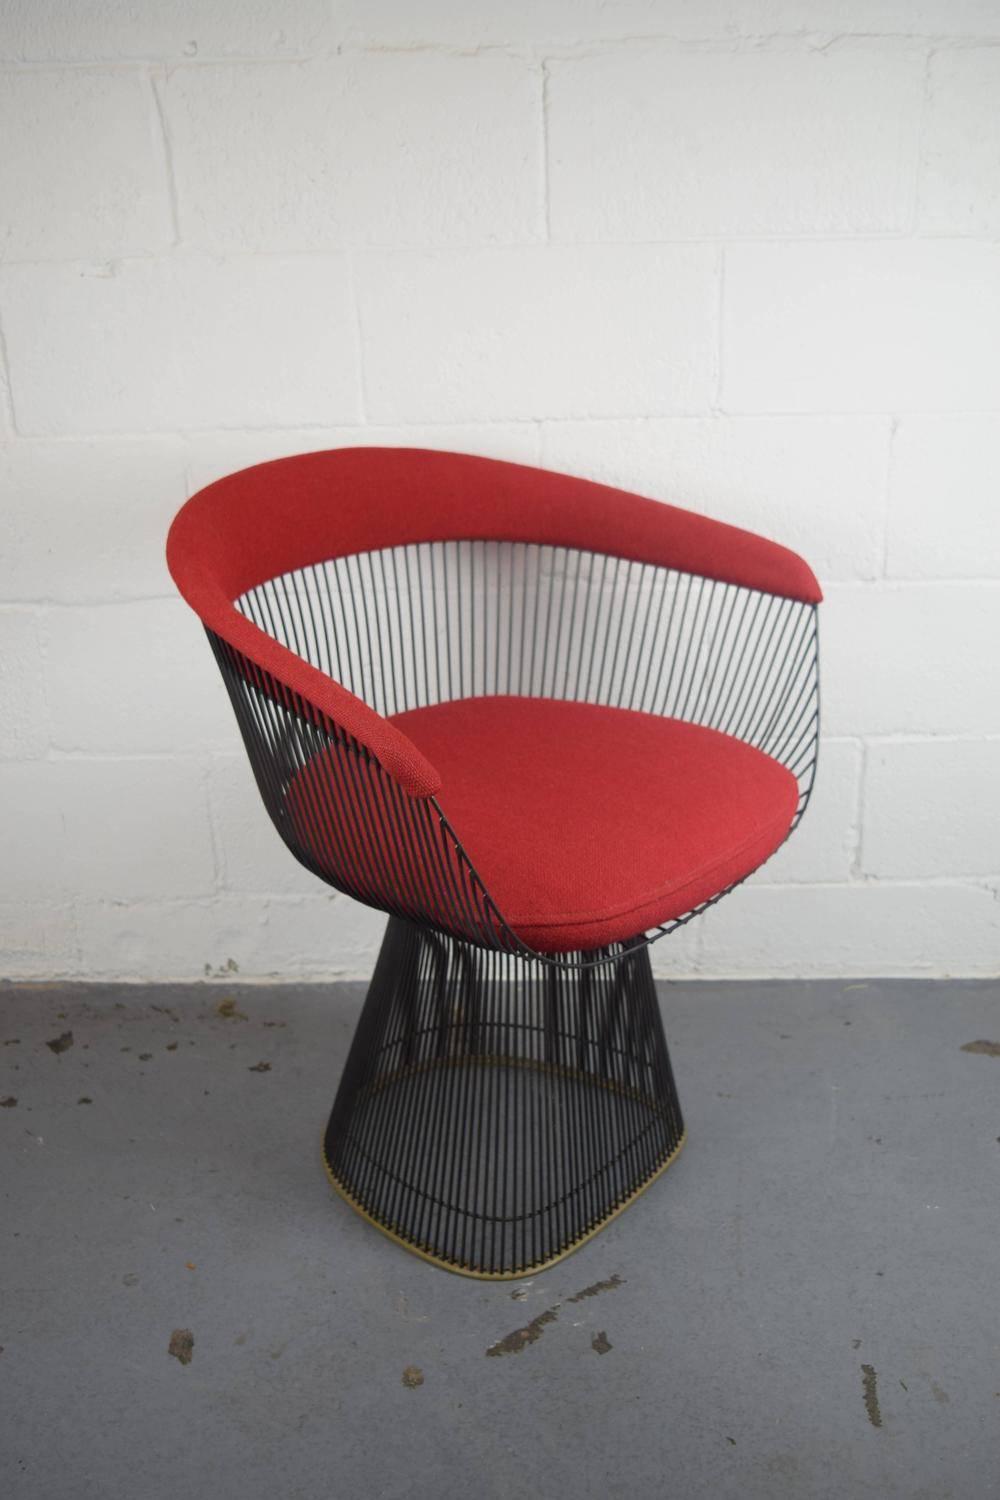 For your consideration is a fantastic set of four vintage Warren Platner for Knoll dining chairs with the rare bronze frames and red boucle fabric. This set is in phenomenal original condition. It sat for years in the original owners' second home